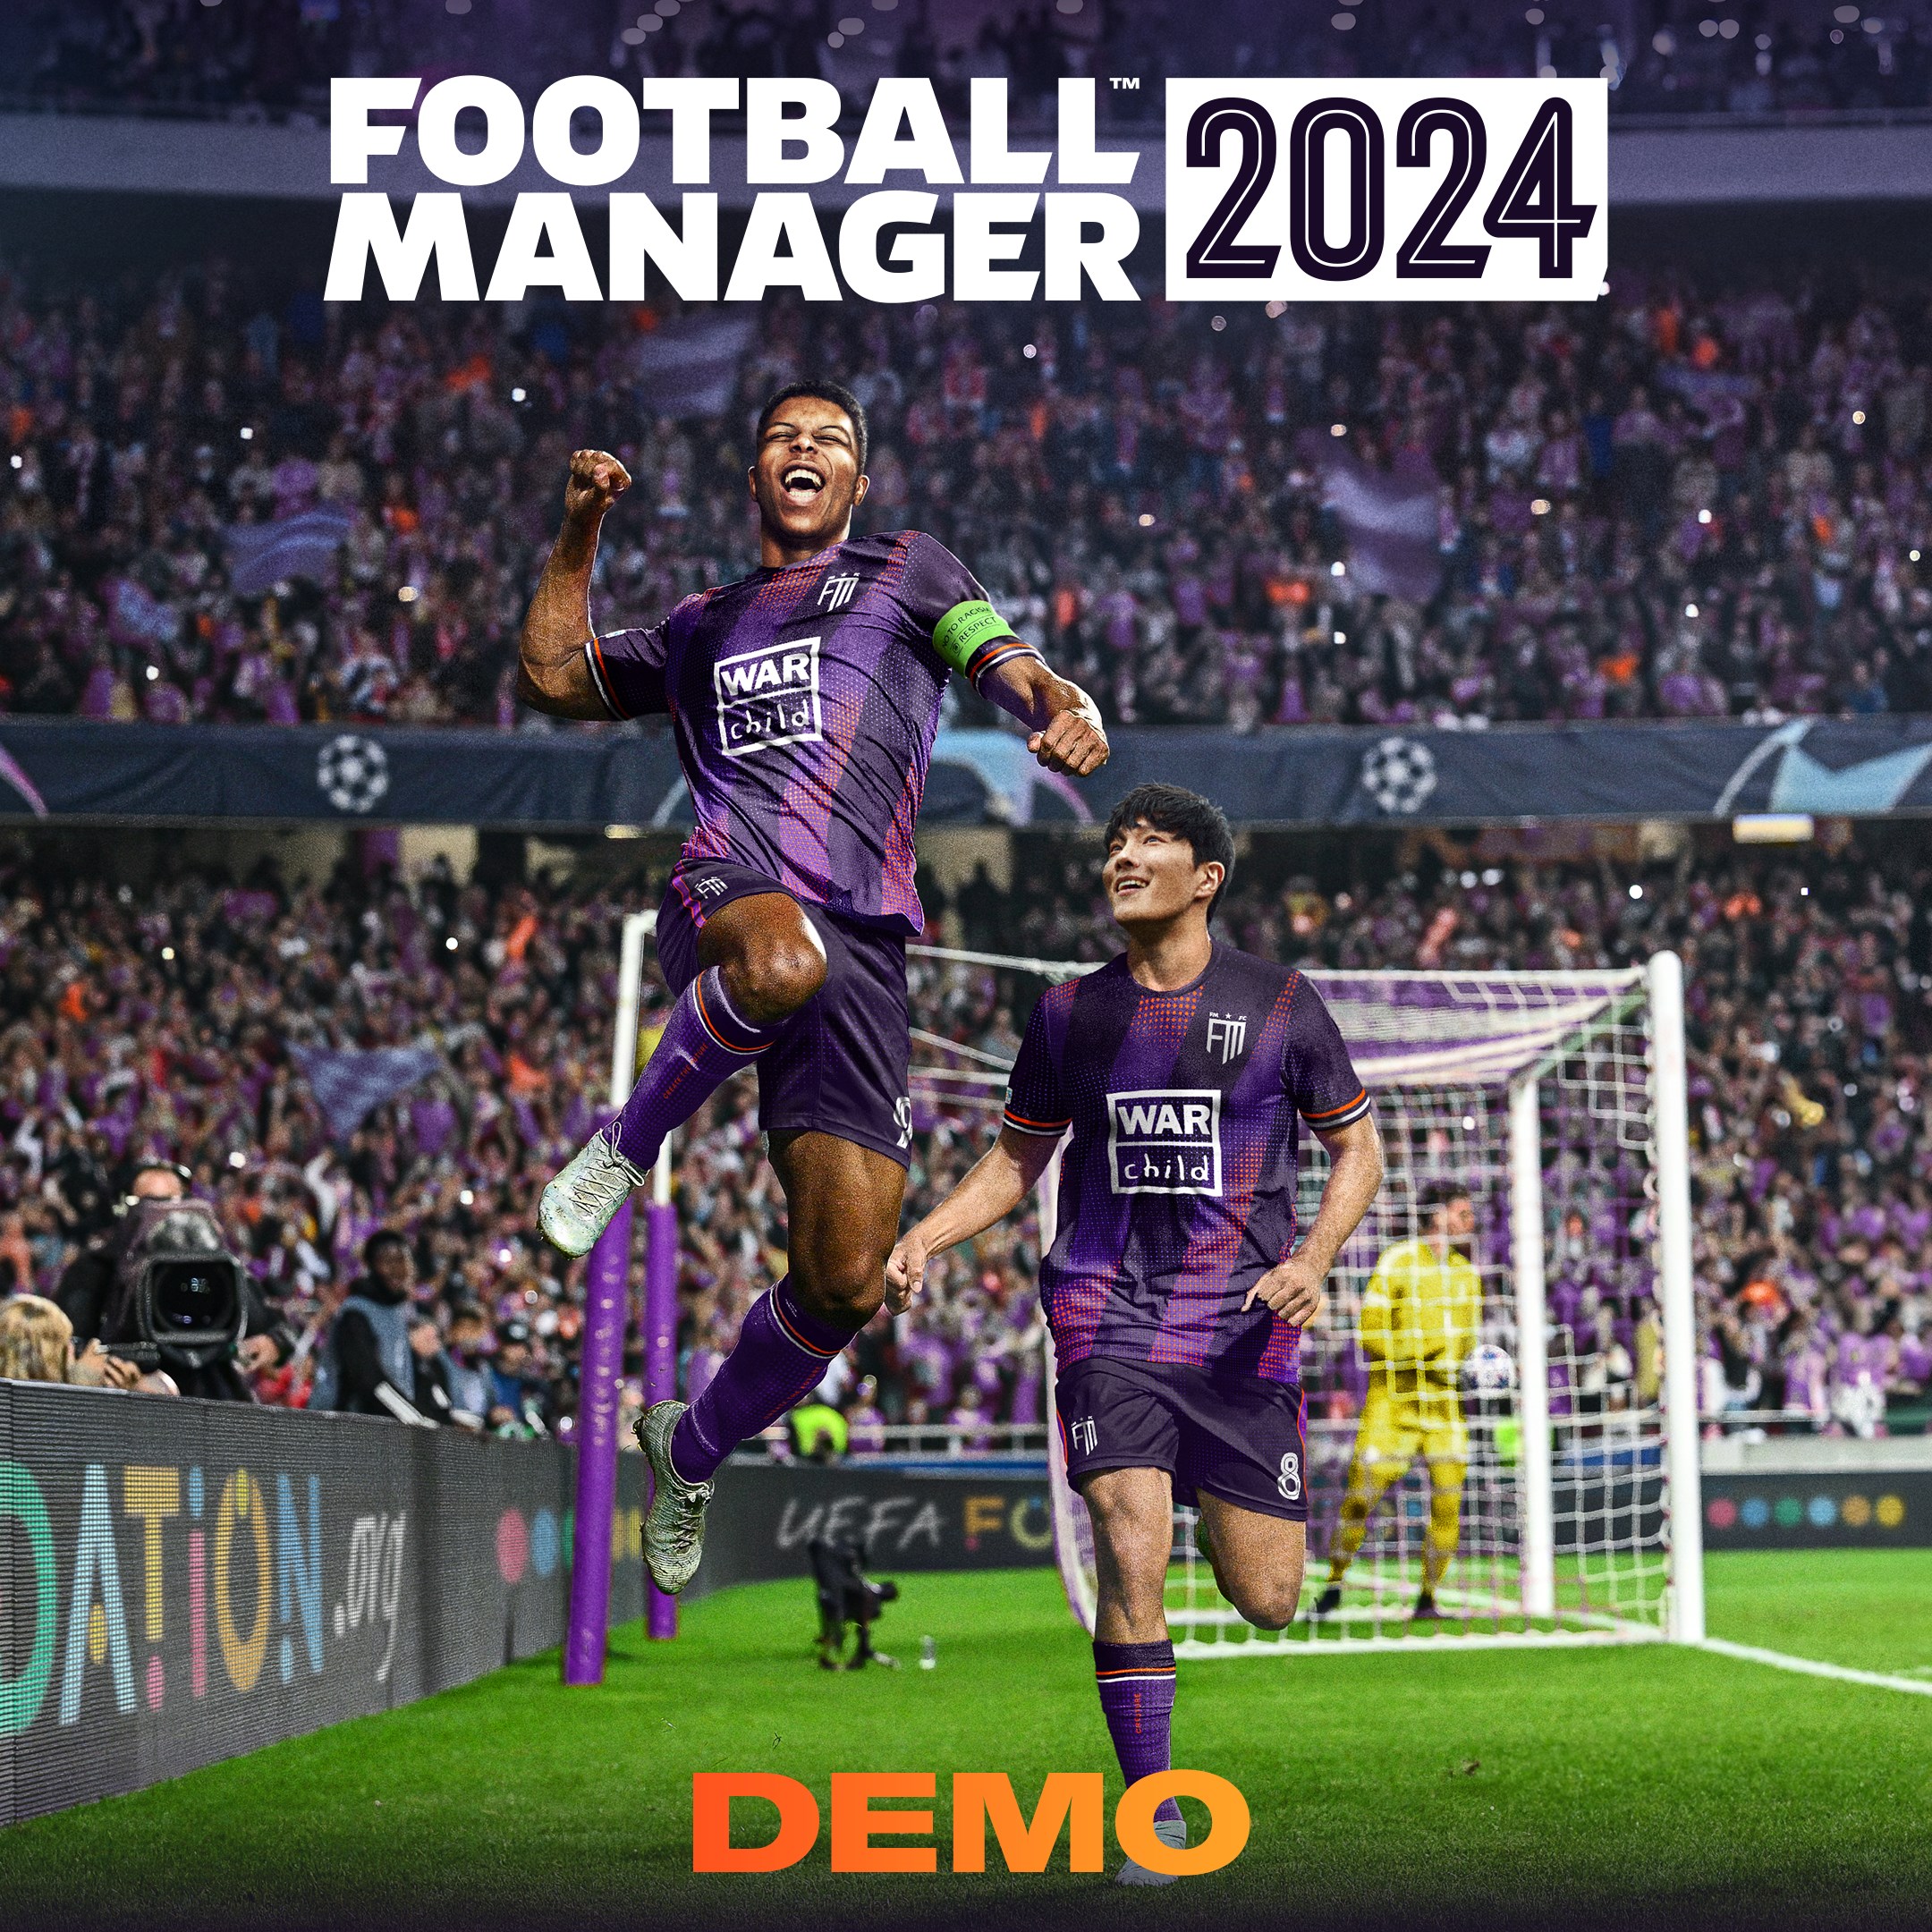 Football Manager 2024 Demo Official game in the Microsoft Store